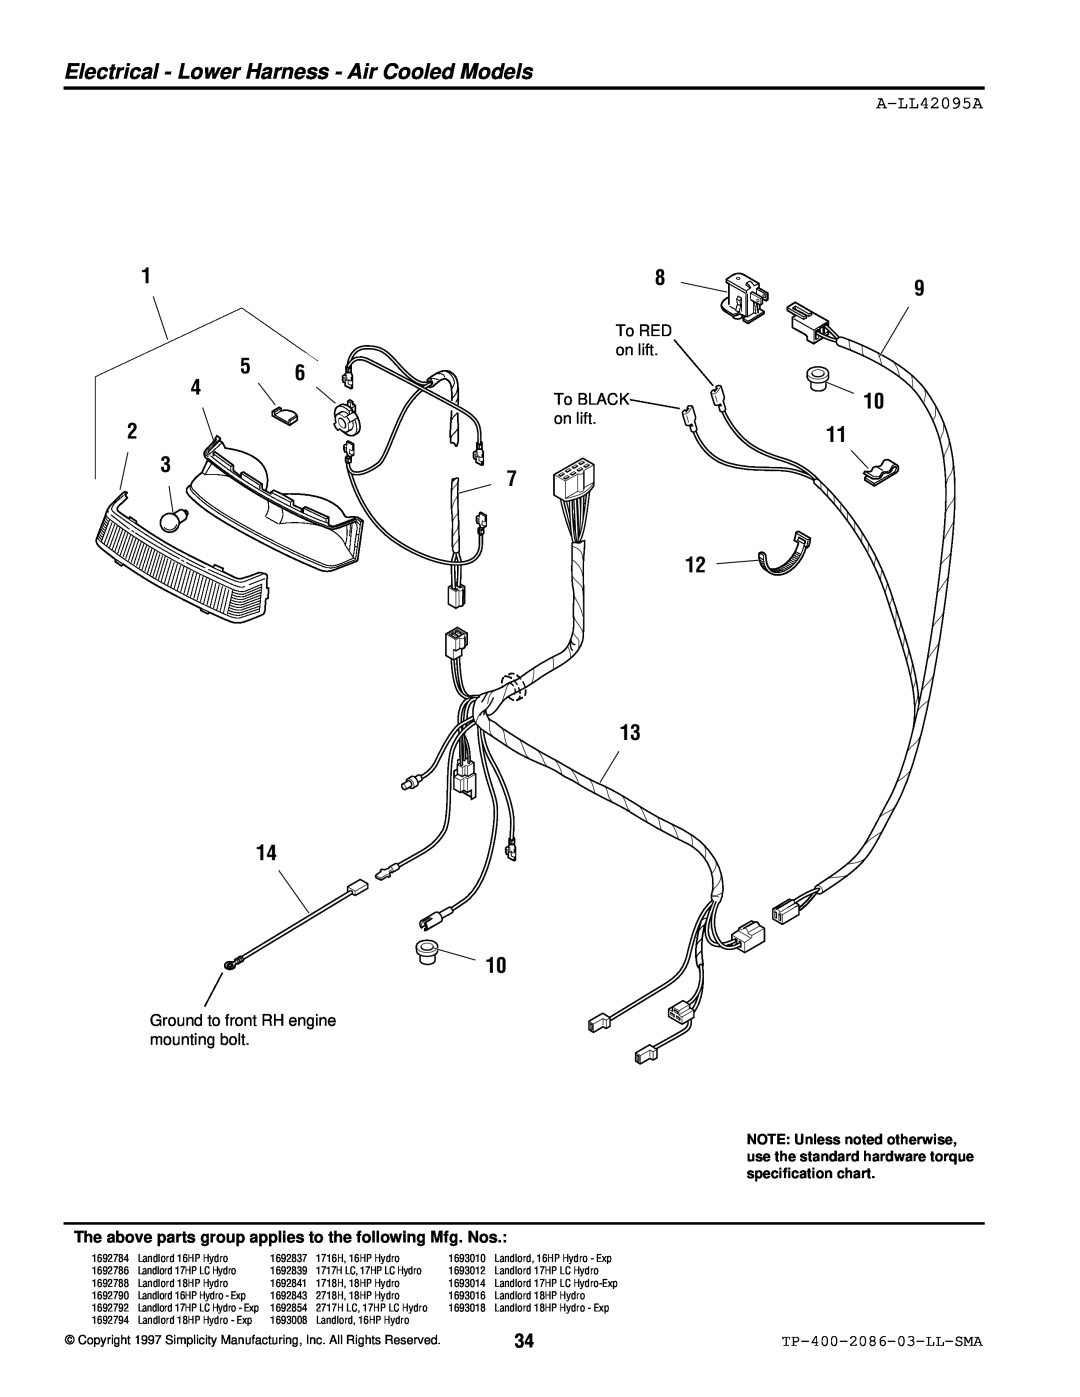 Simplicity 2700, 1700 manual Electrical - Lower Harness - Air Cooled Models, A-LL42095A, TP-400-2086-03-LL-SMA 